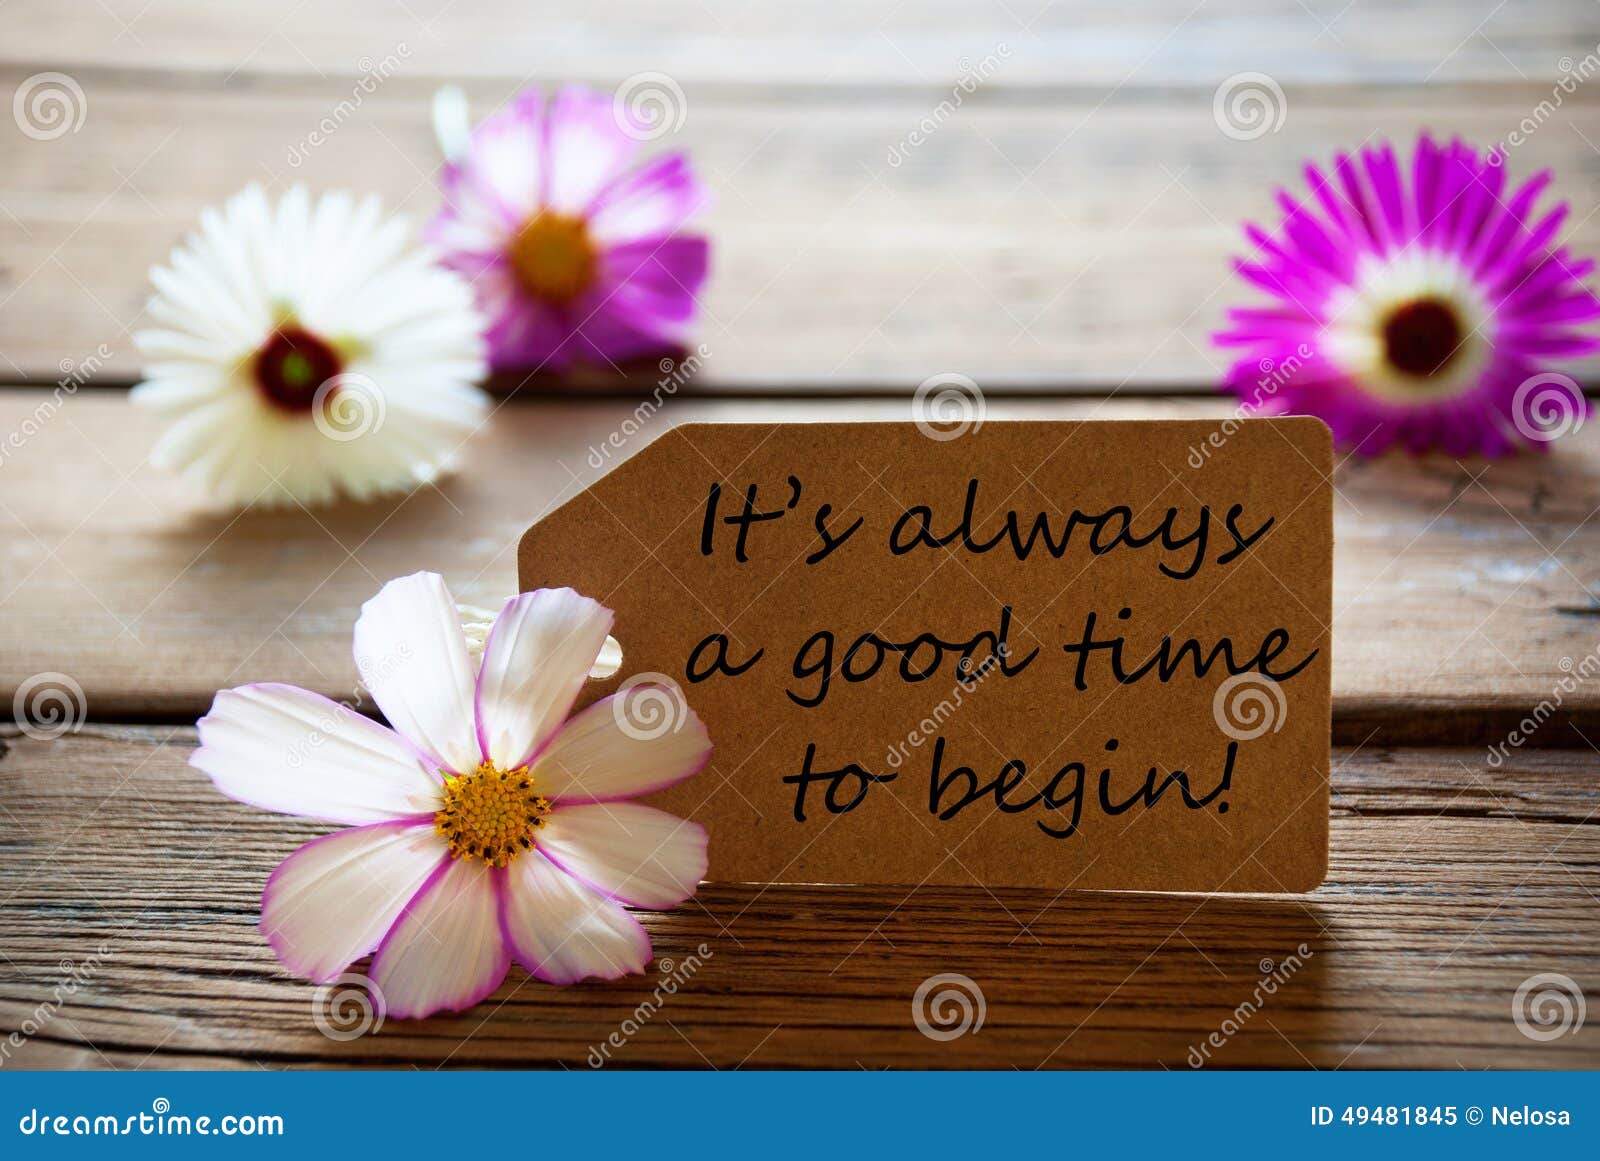 label with life quote its always a good time to begin with cosmea blossoms